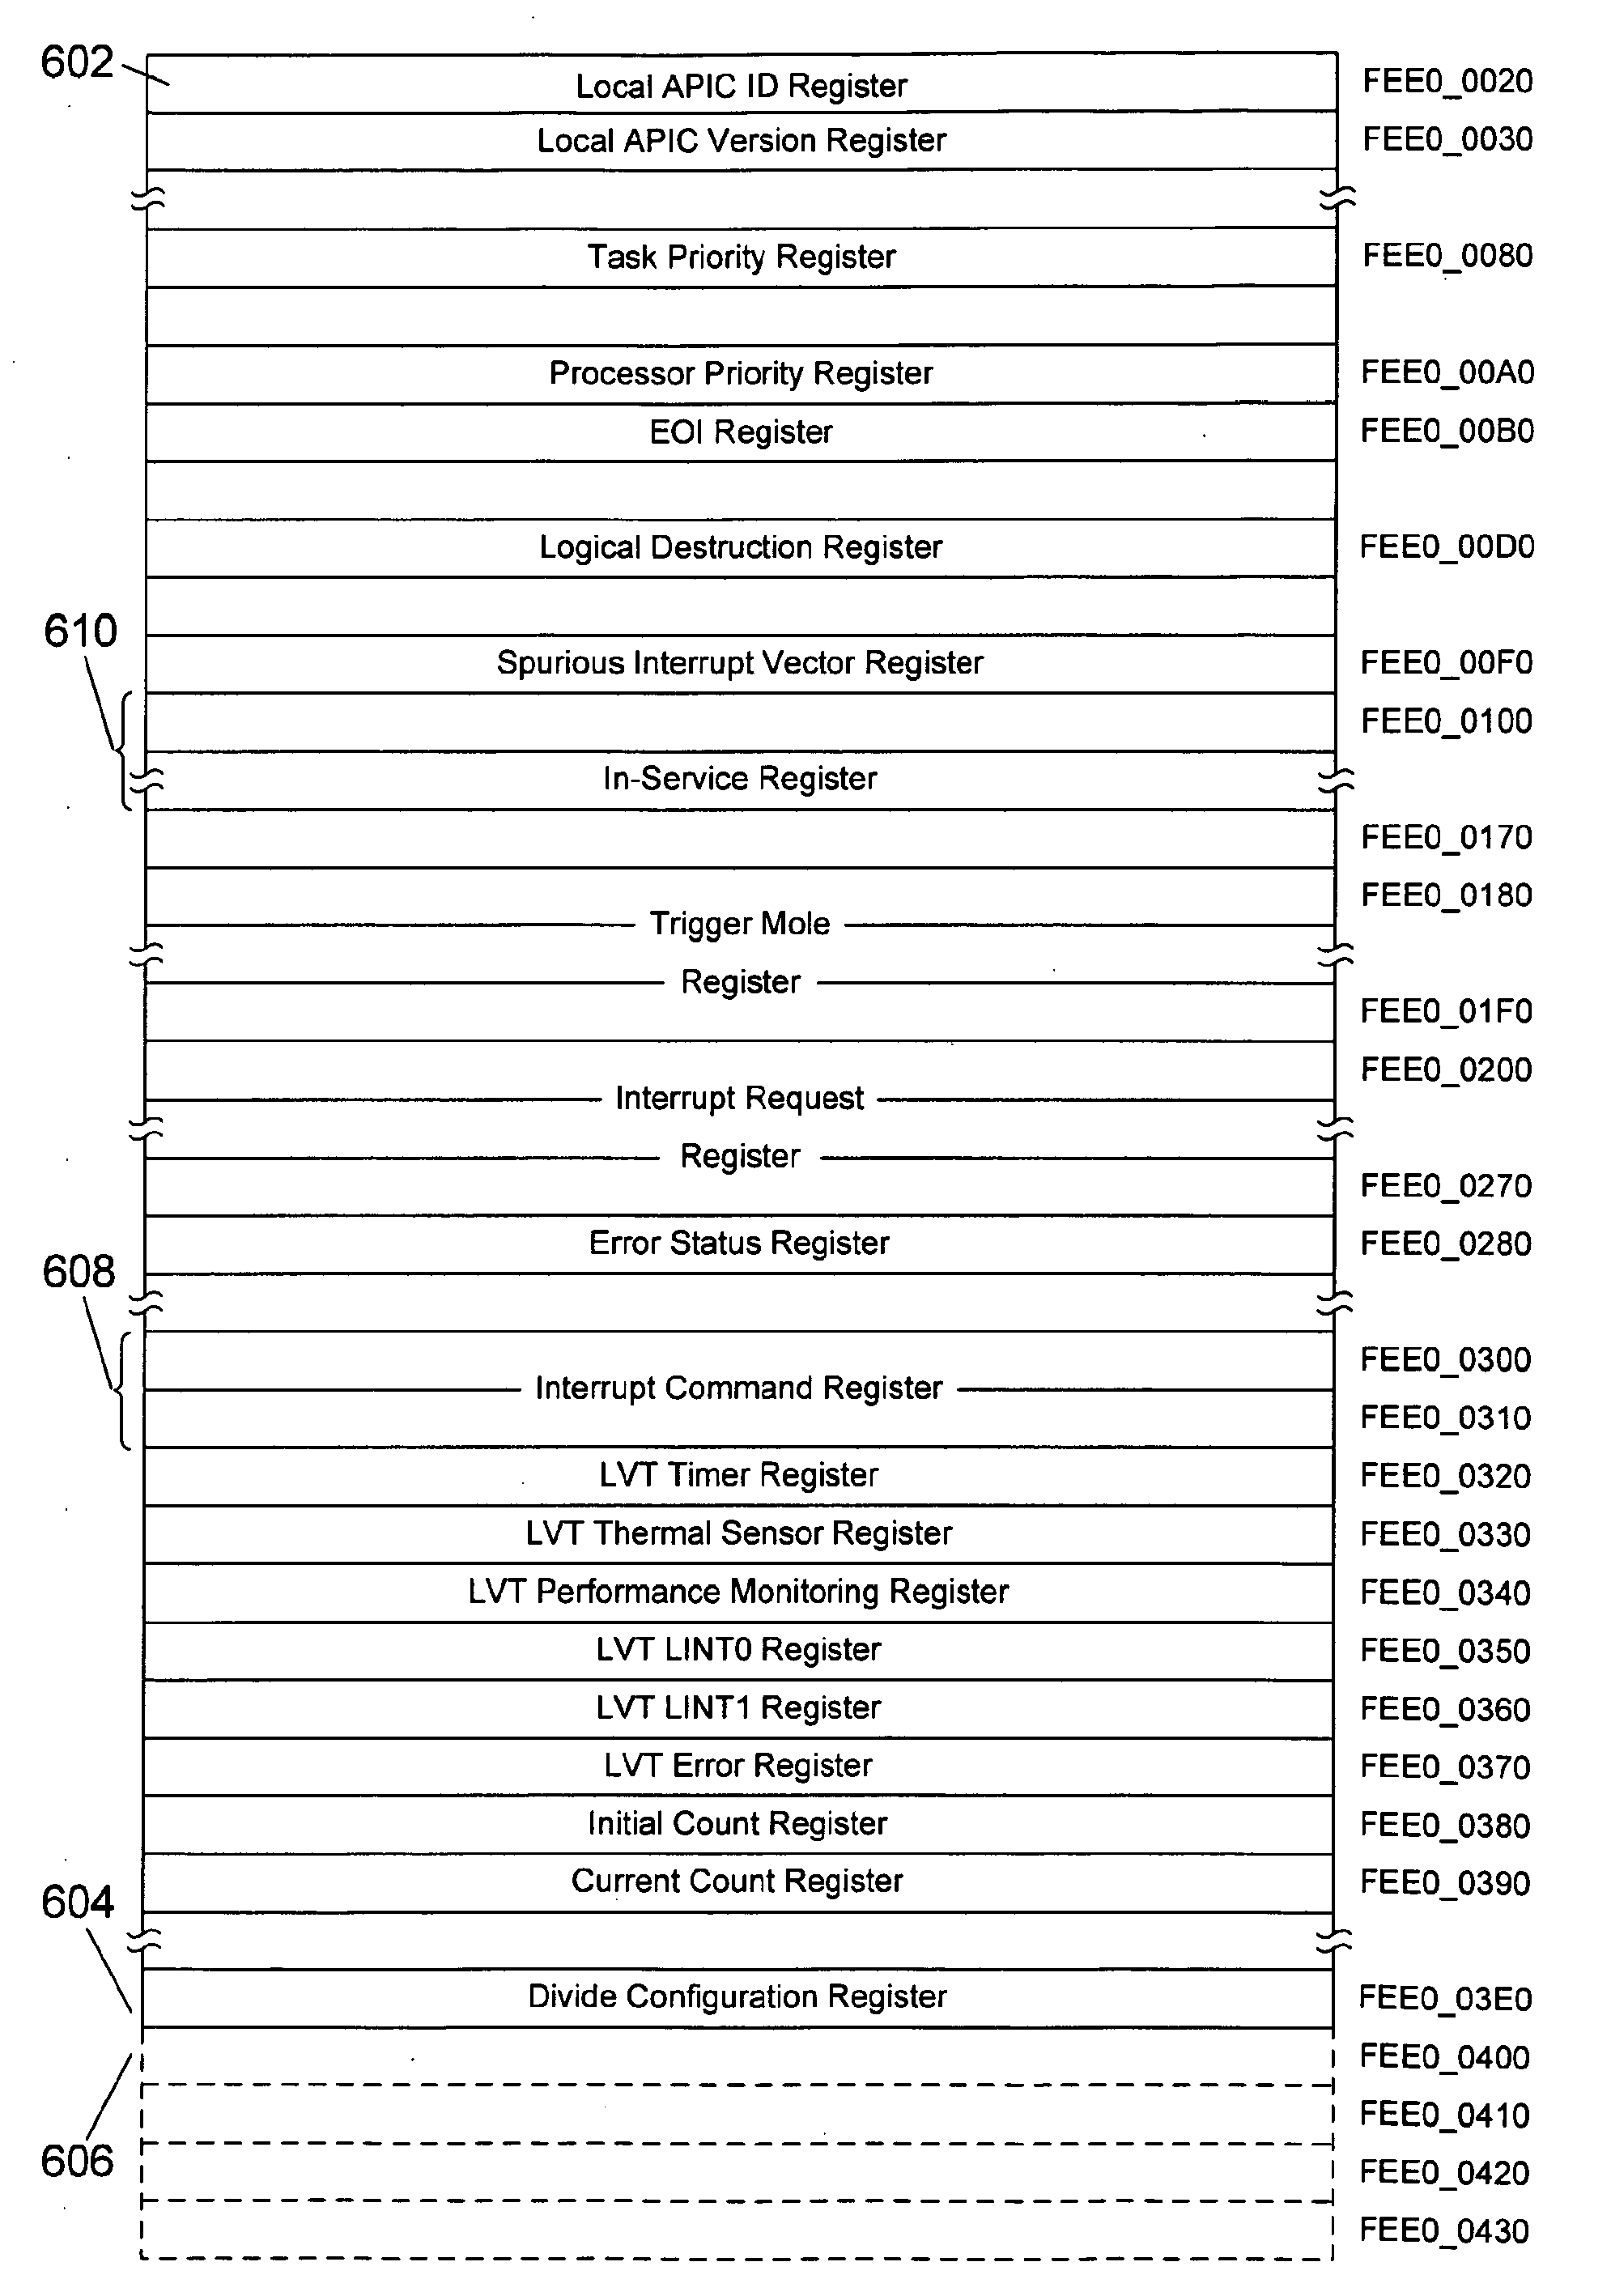 Method and System for Generating and Delivering Inter-Processor Interrupts in a Multi-Core Processor and in Ceterain Shared Memory Multi-Processor Systems